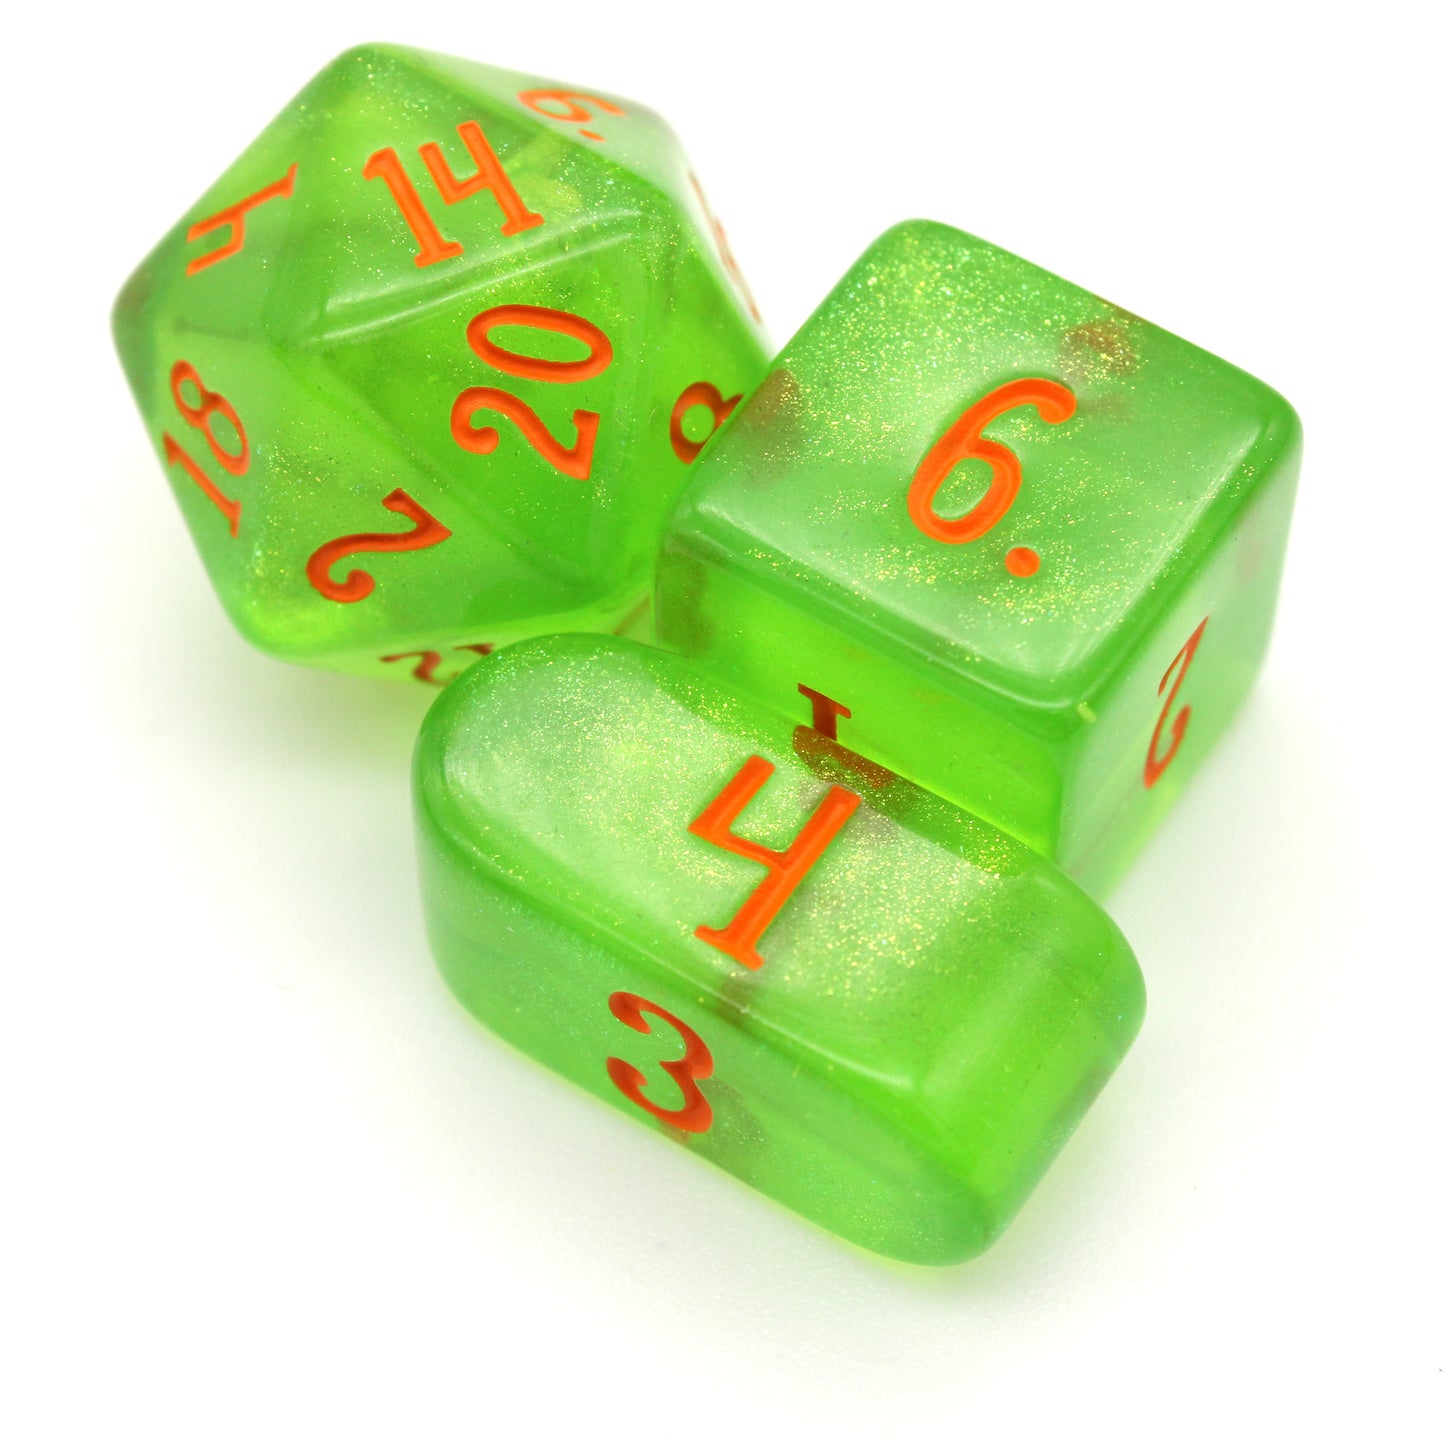 A 10-piece set of transparent green dice filled with micro glitter and inked in orange.